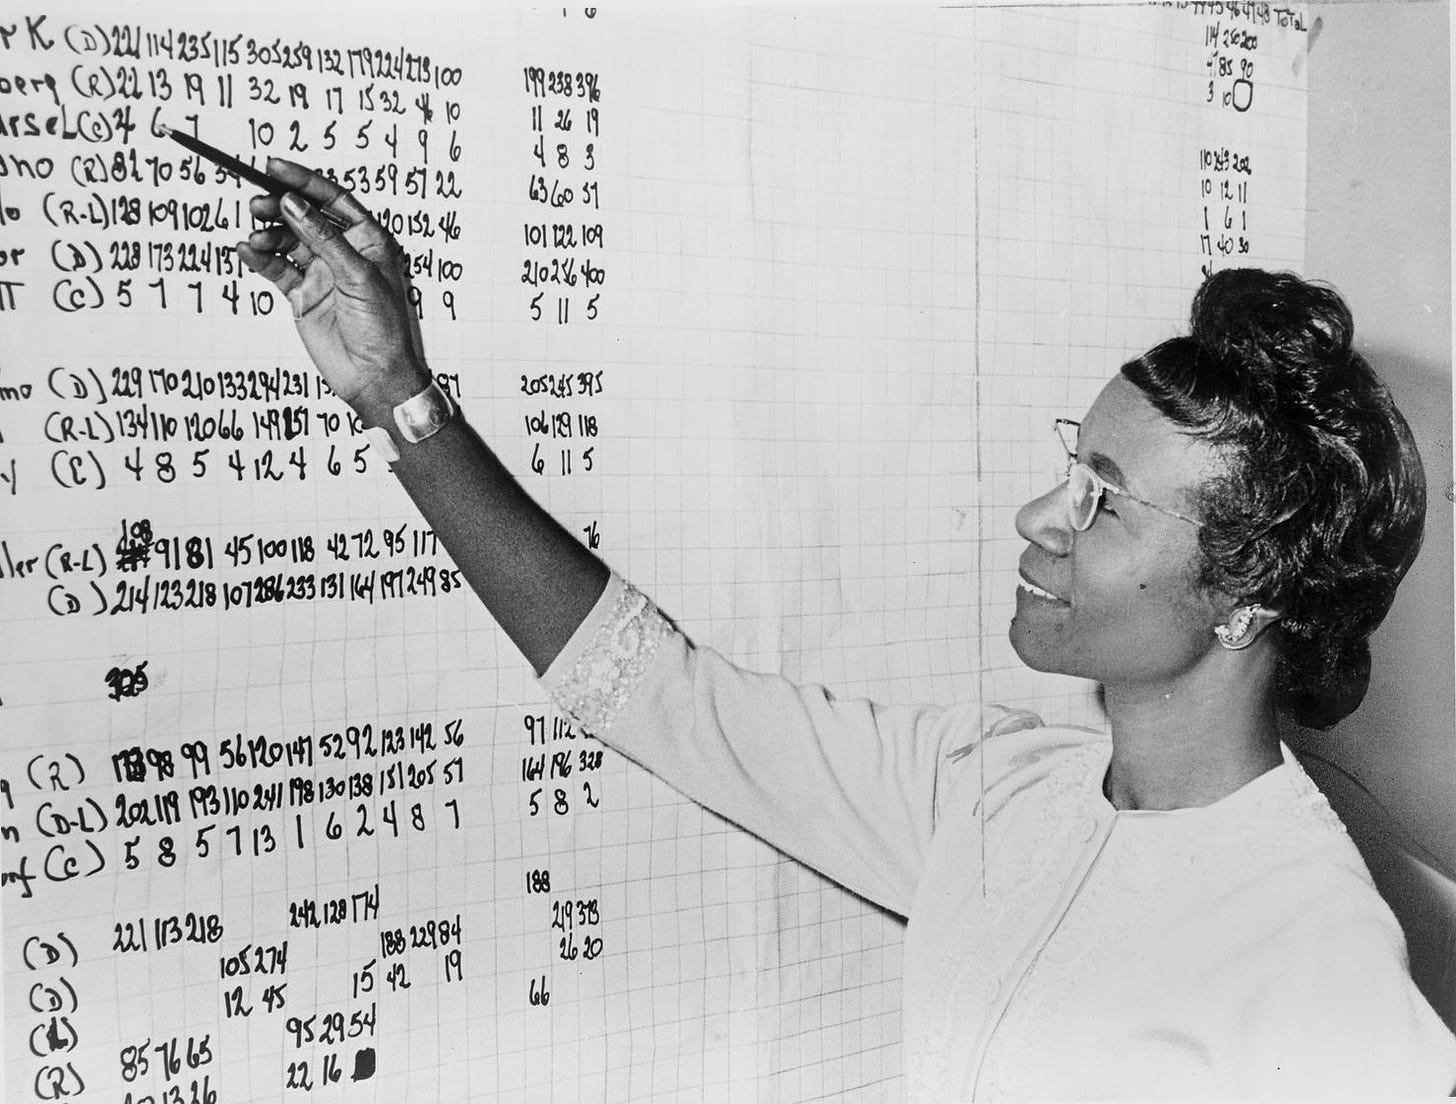 Shirley Chisholm, a Congresswoman from New York, looking at the list of numbers posted on a wall.